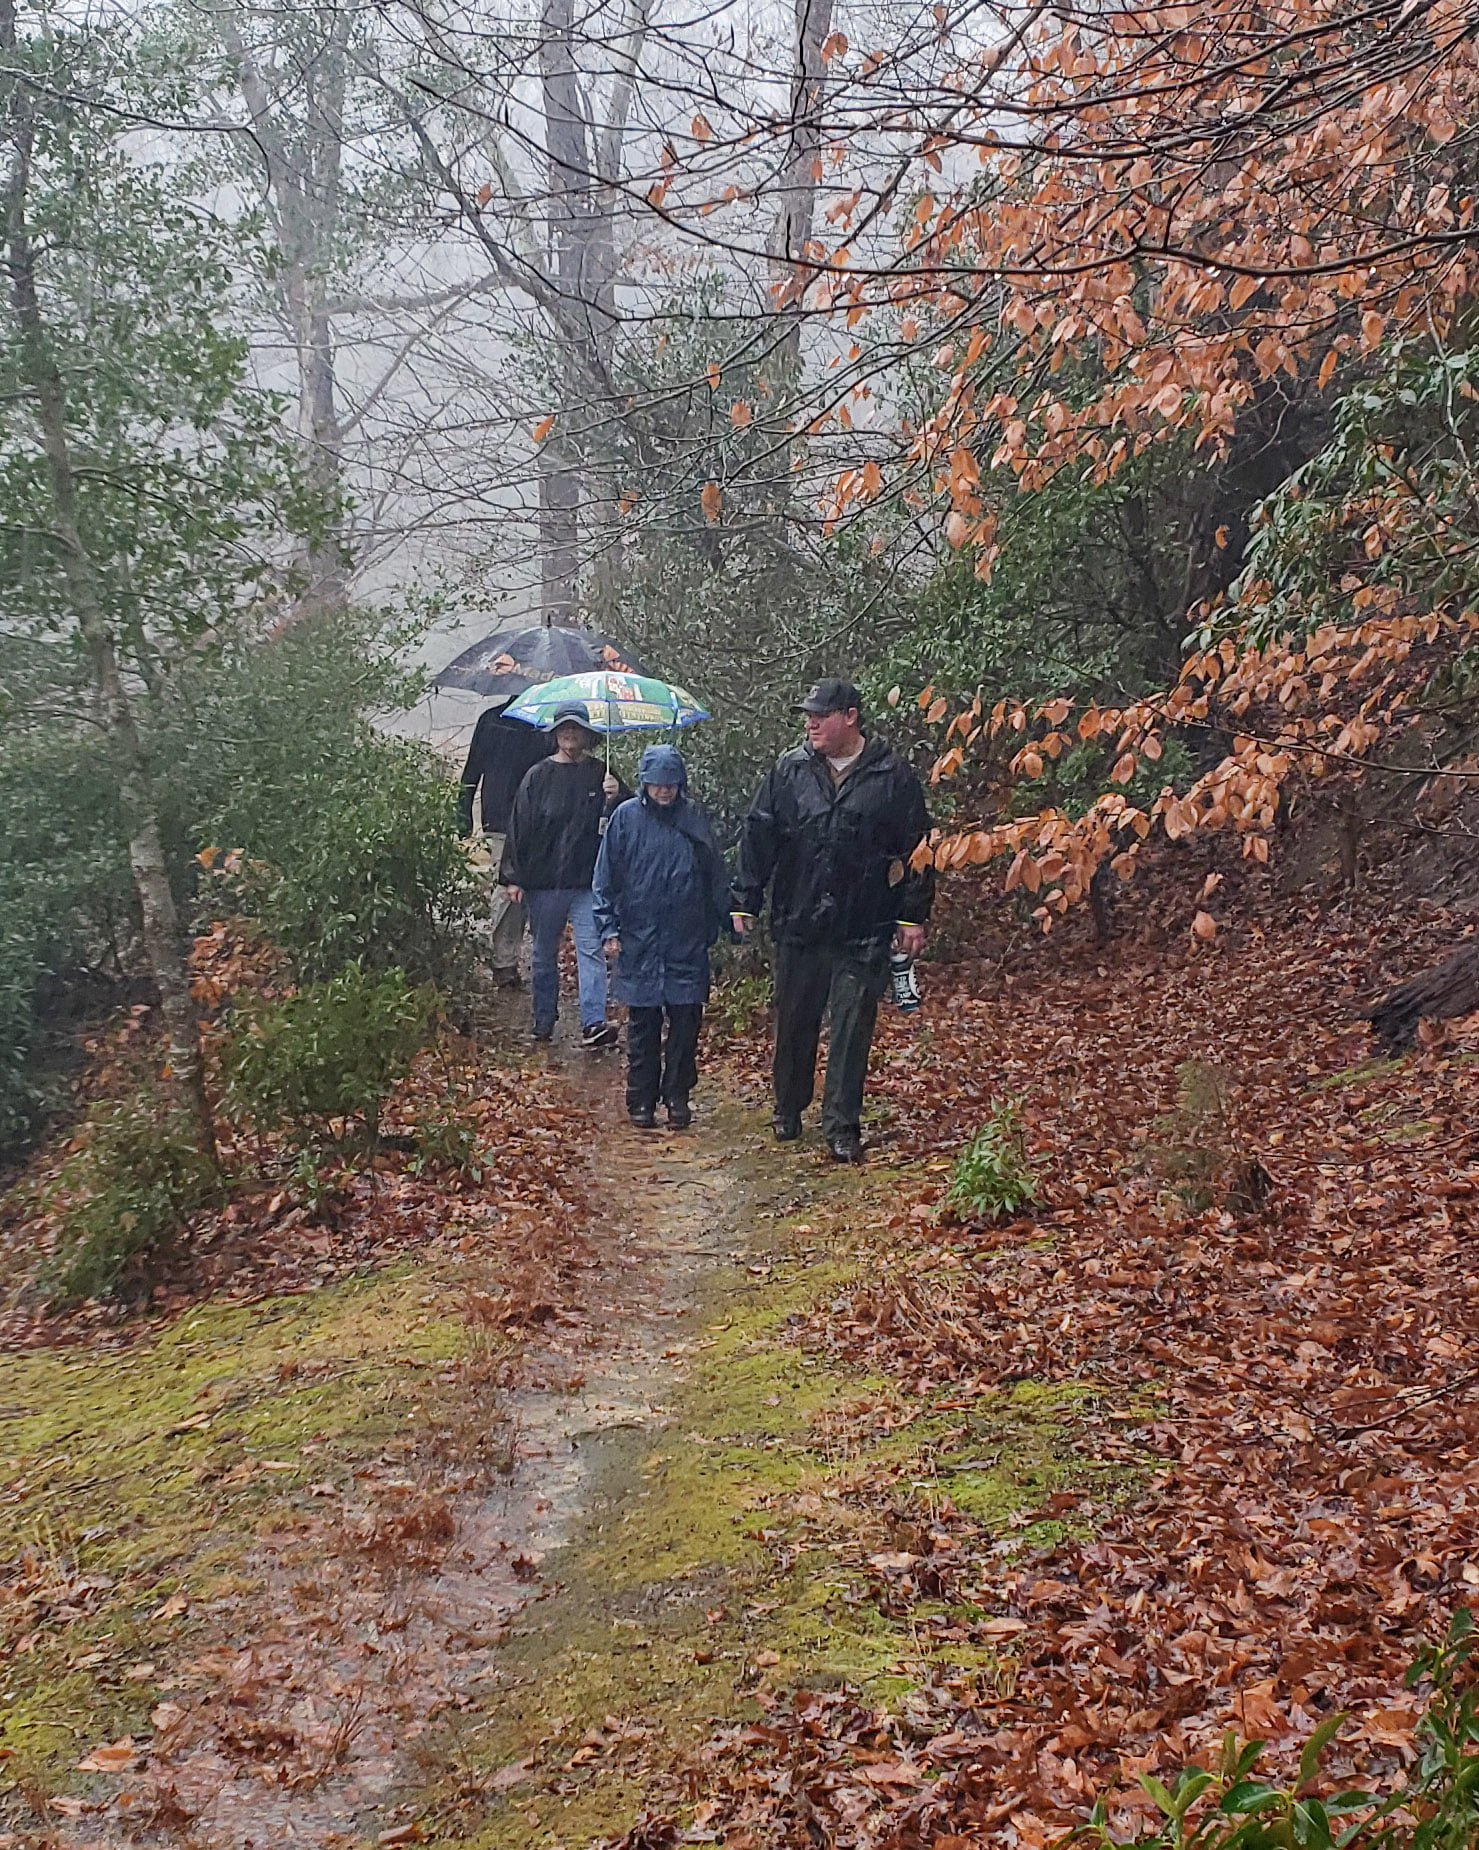 First Day Hikes Extends all Weekend, Popularity Continues